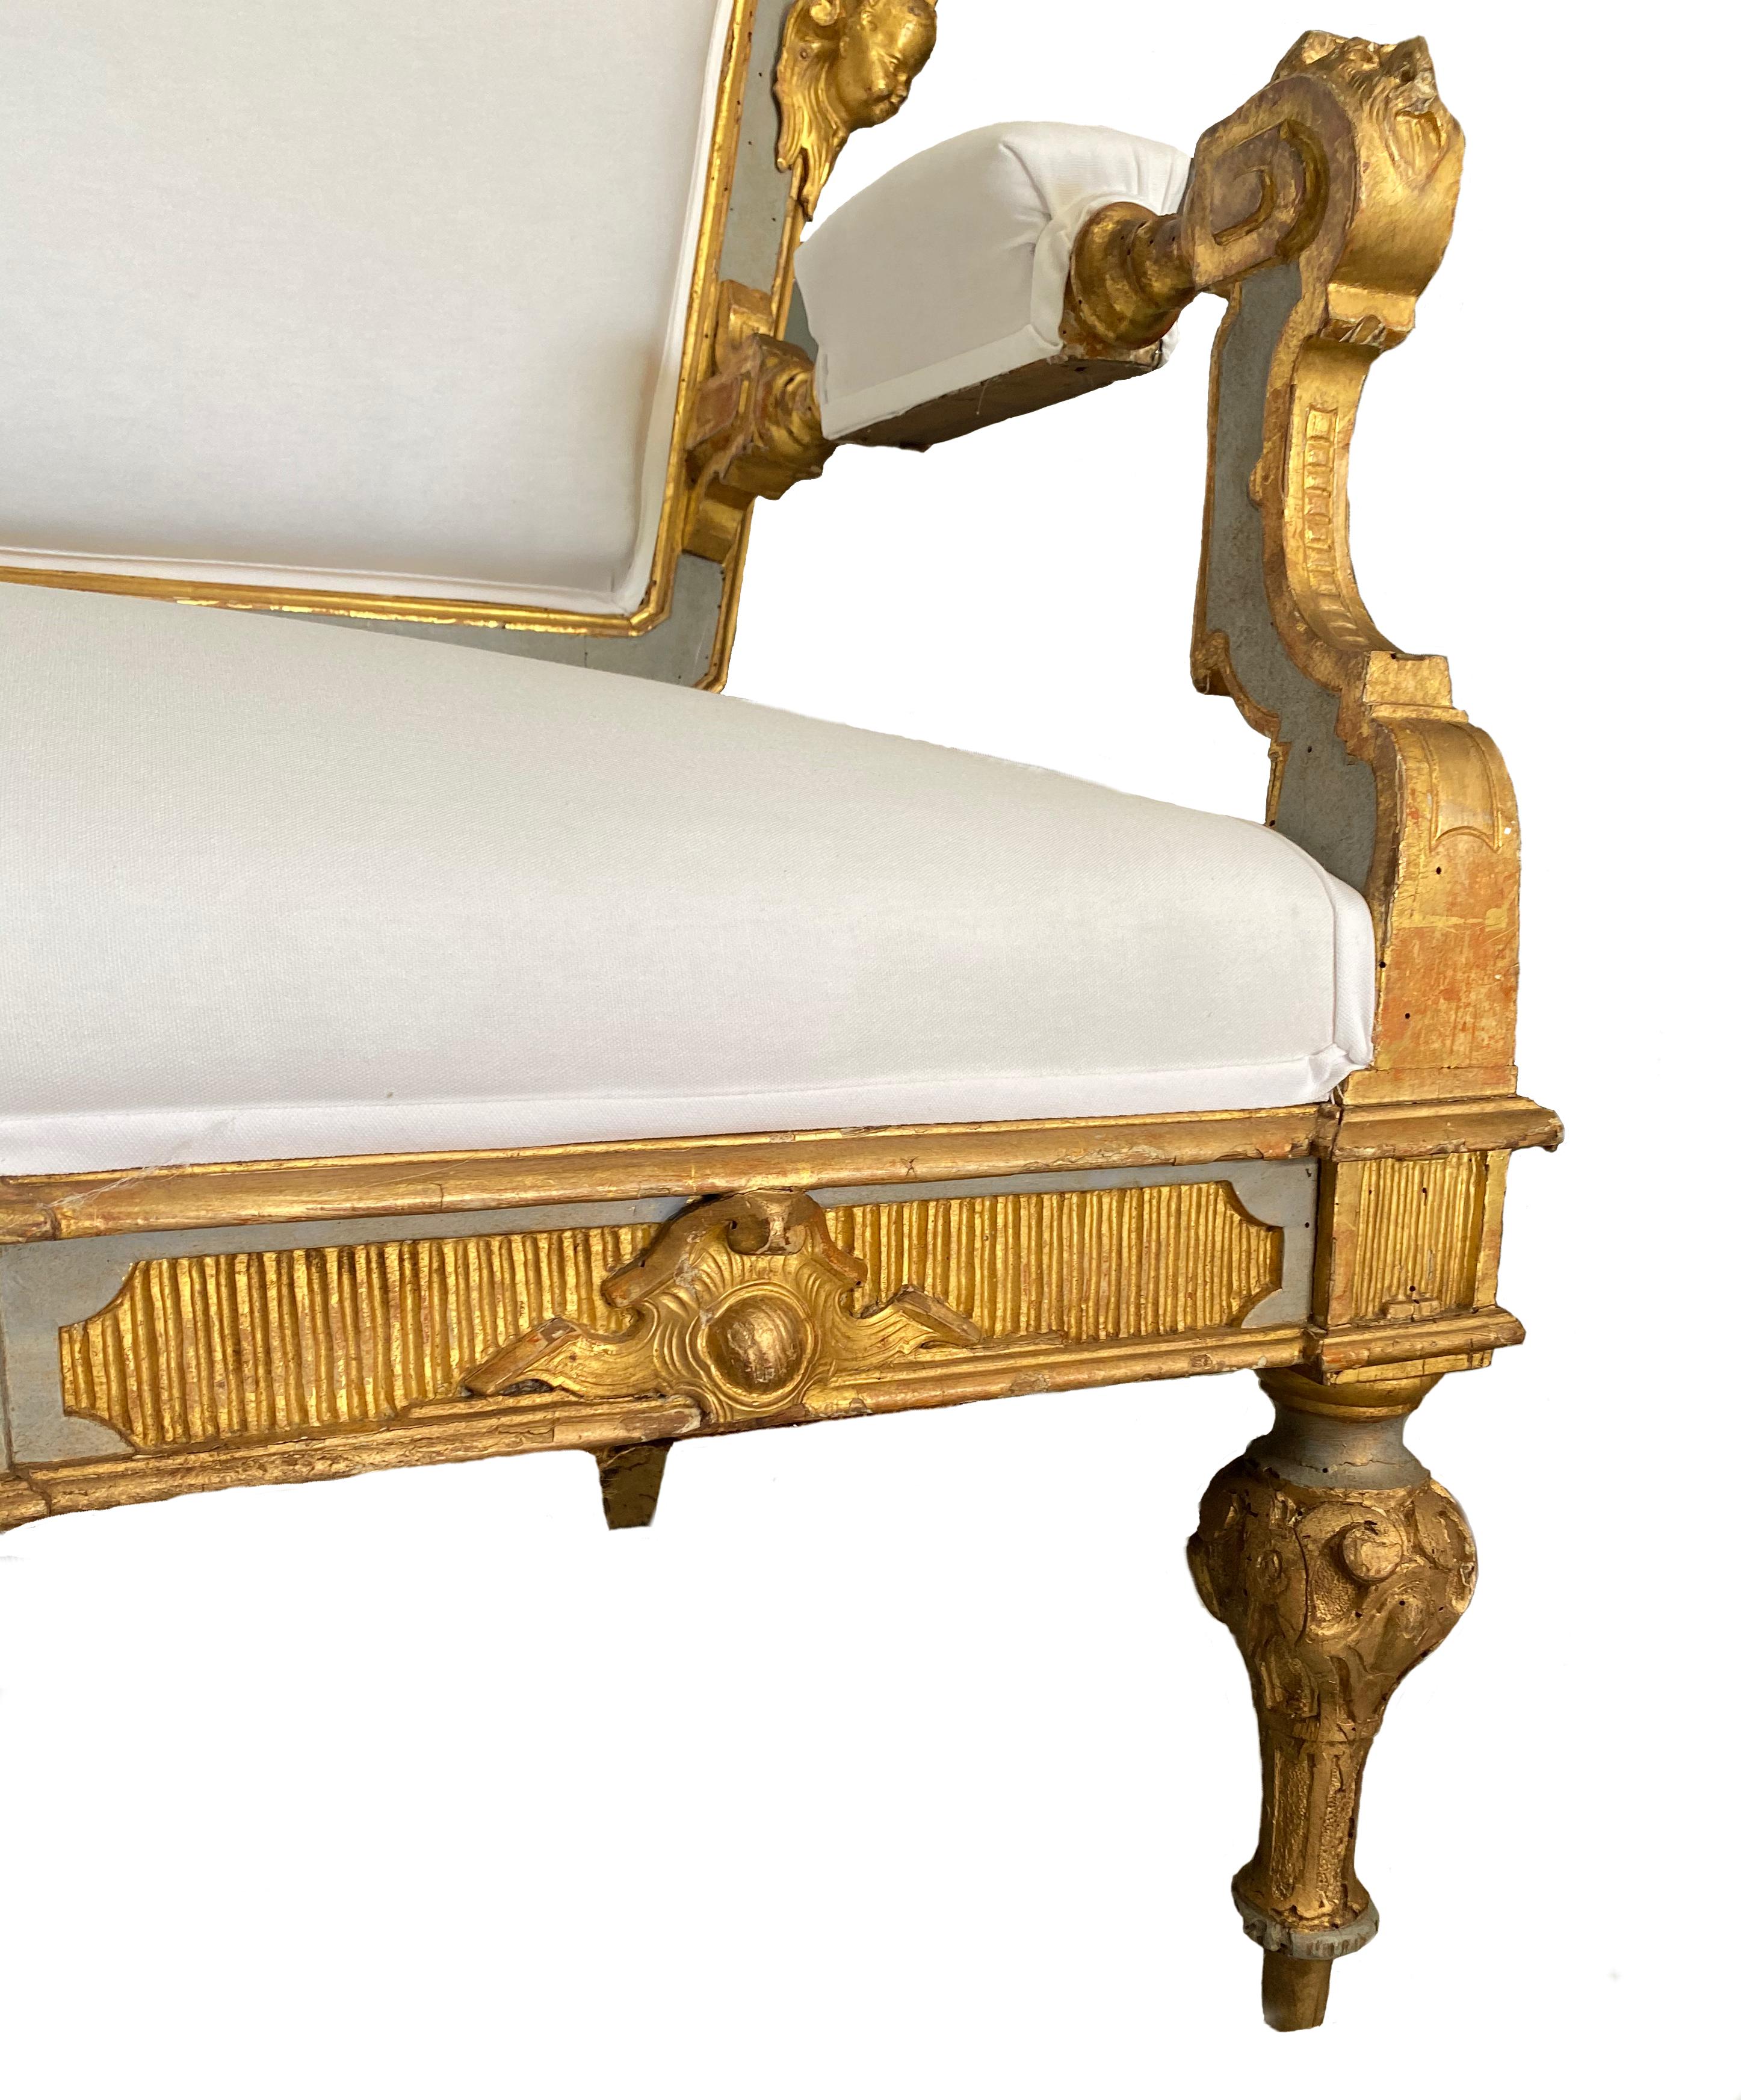 18th Century Italian Blue and Gilt Settee with Putti an Ornate Carved Details 1